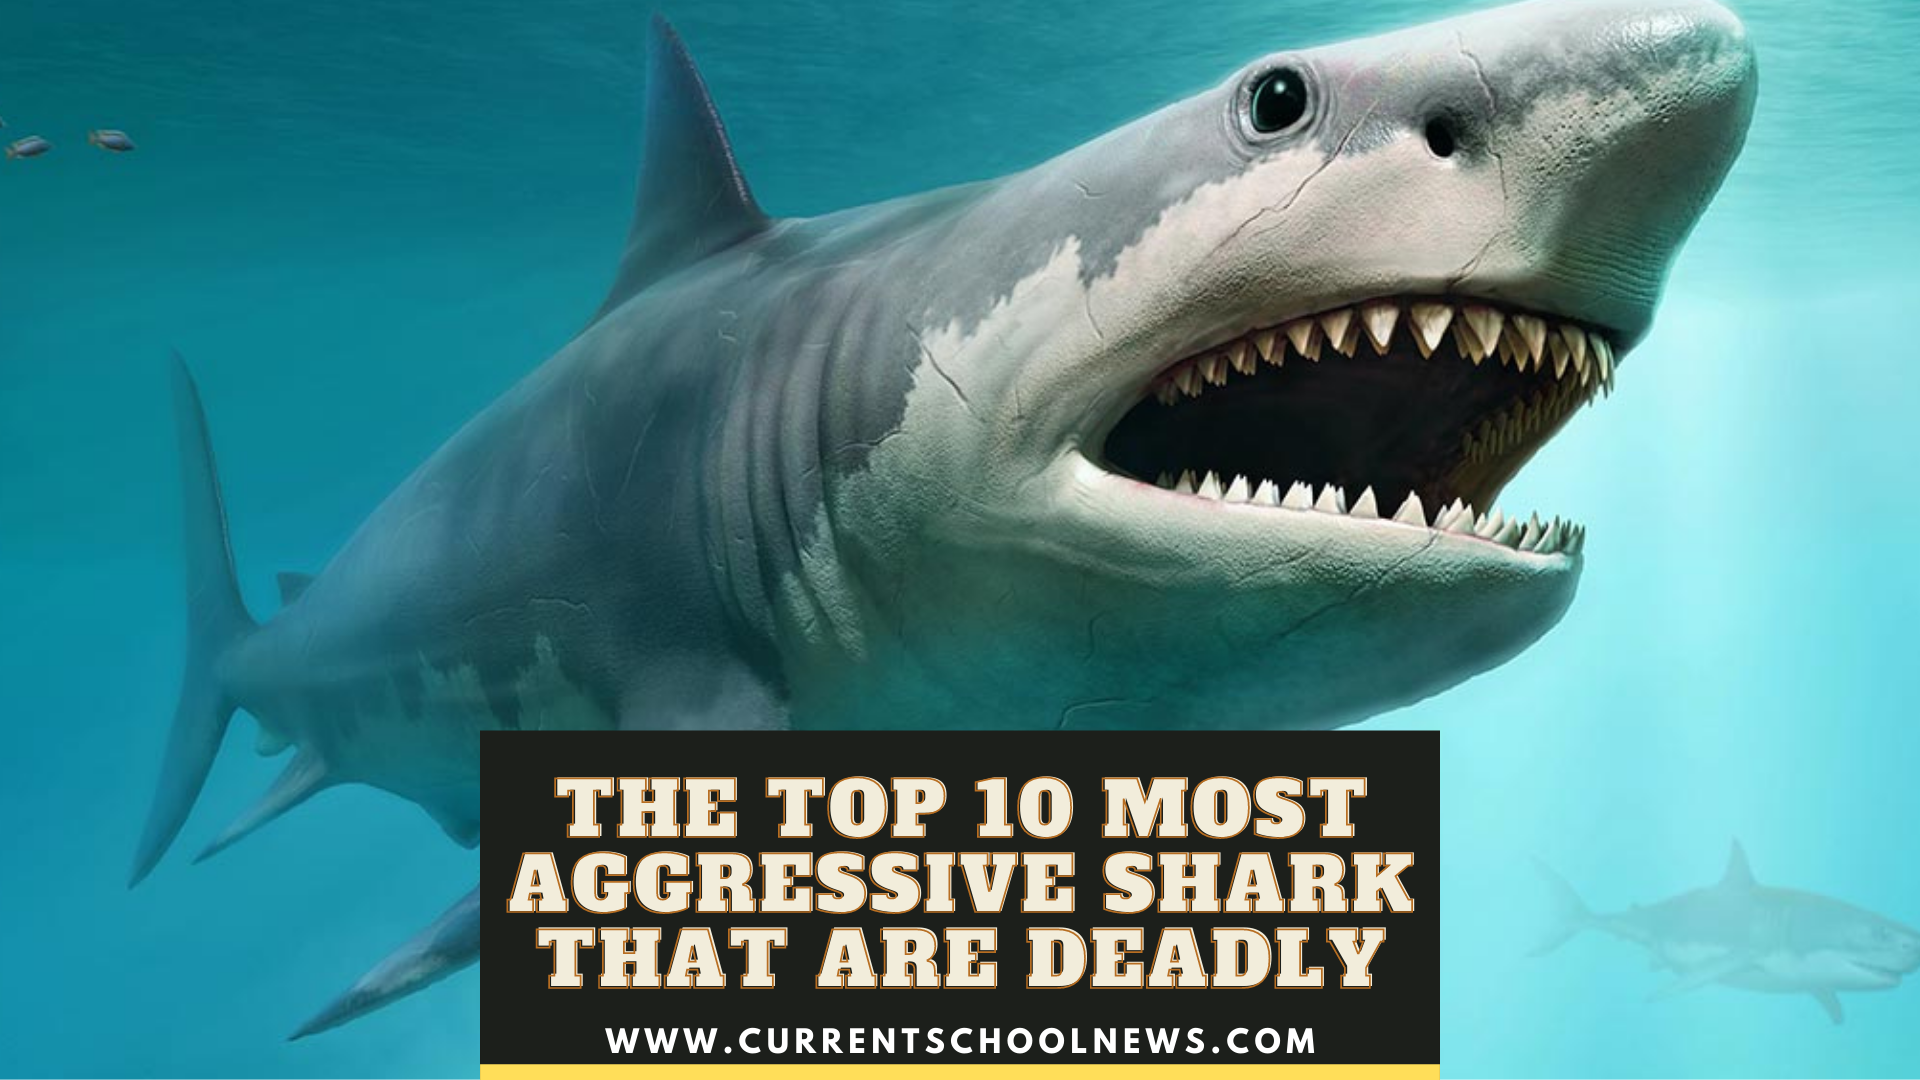 The Top 10 Most Aggressive Shark That are Deadly